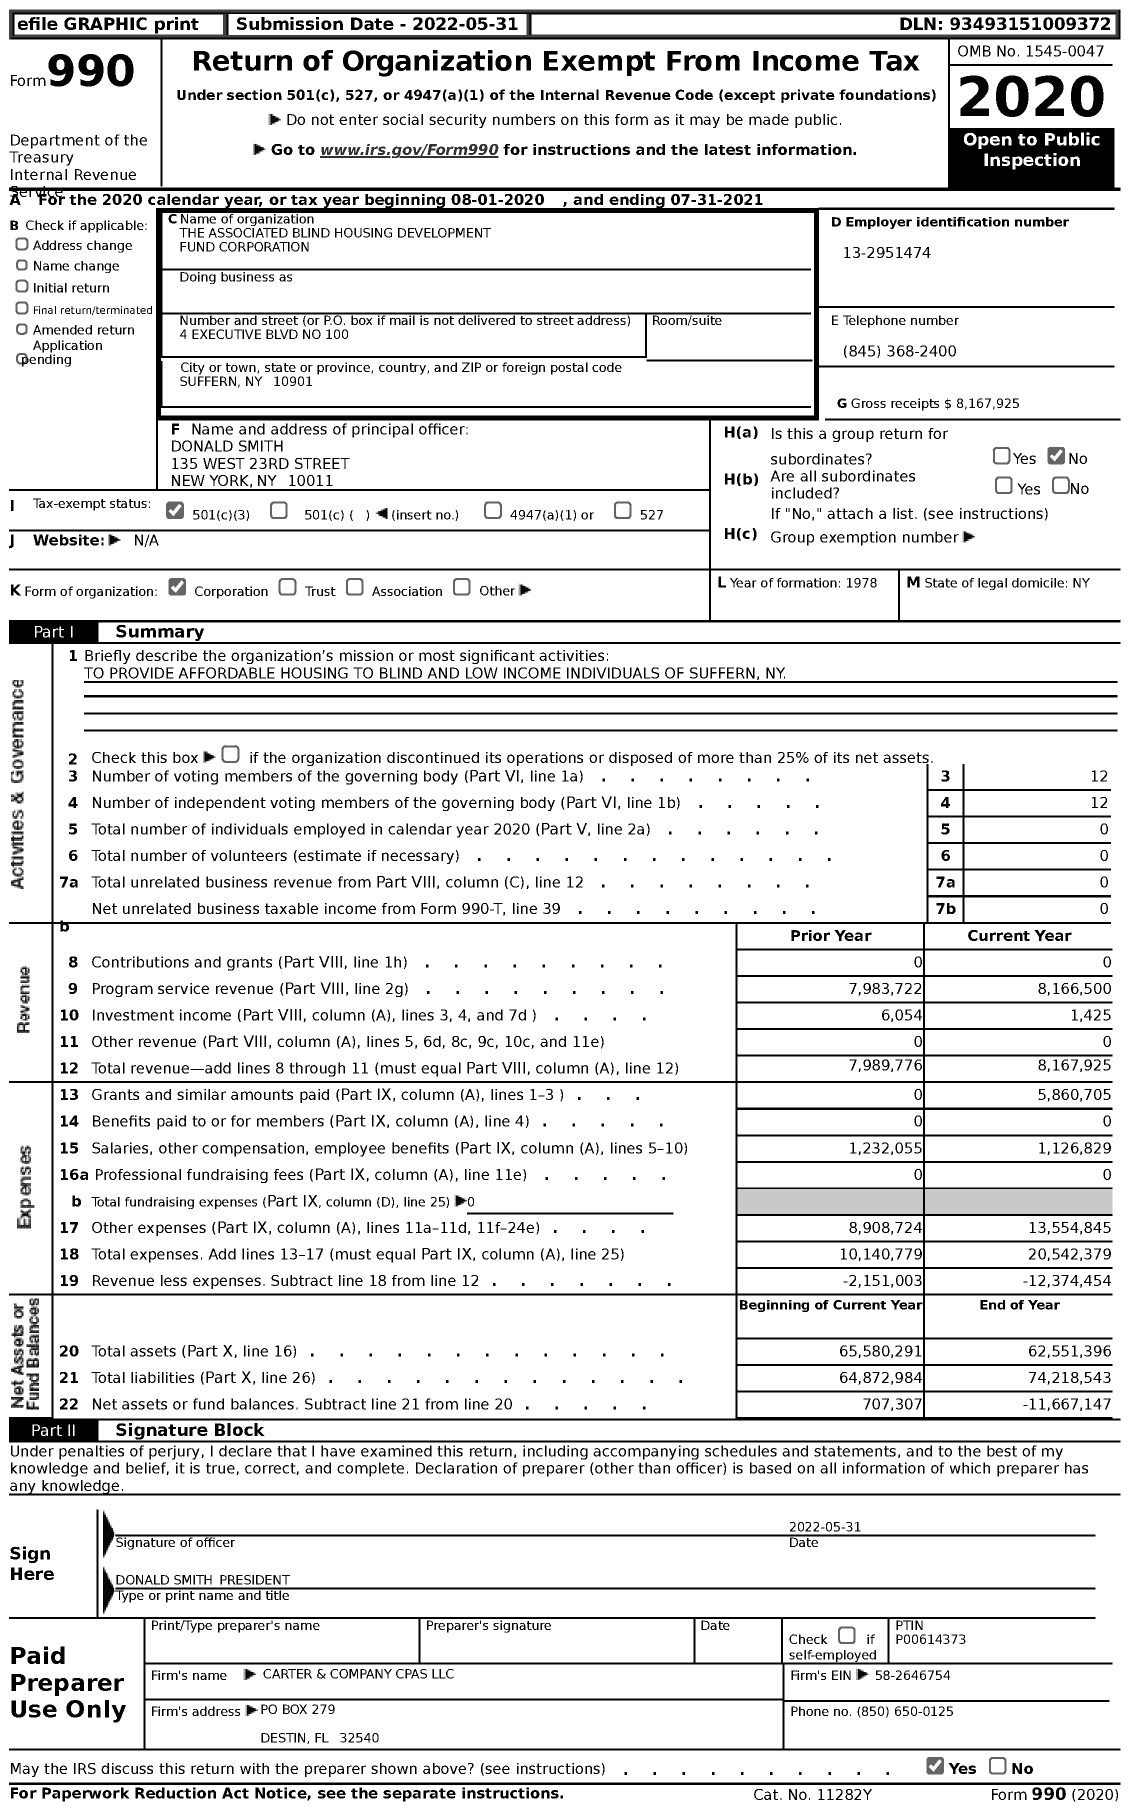 Image of first page of 2020 Form 990 for The Associated Blind Housing Development Fund Corporation